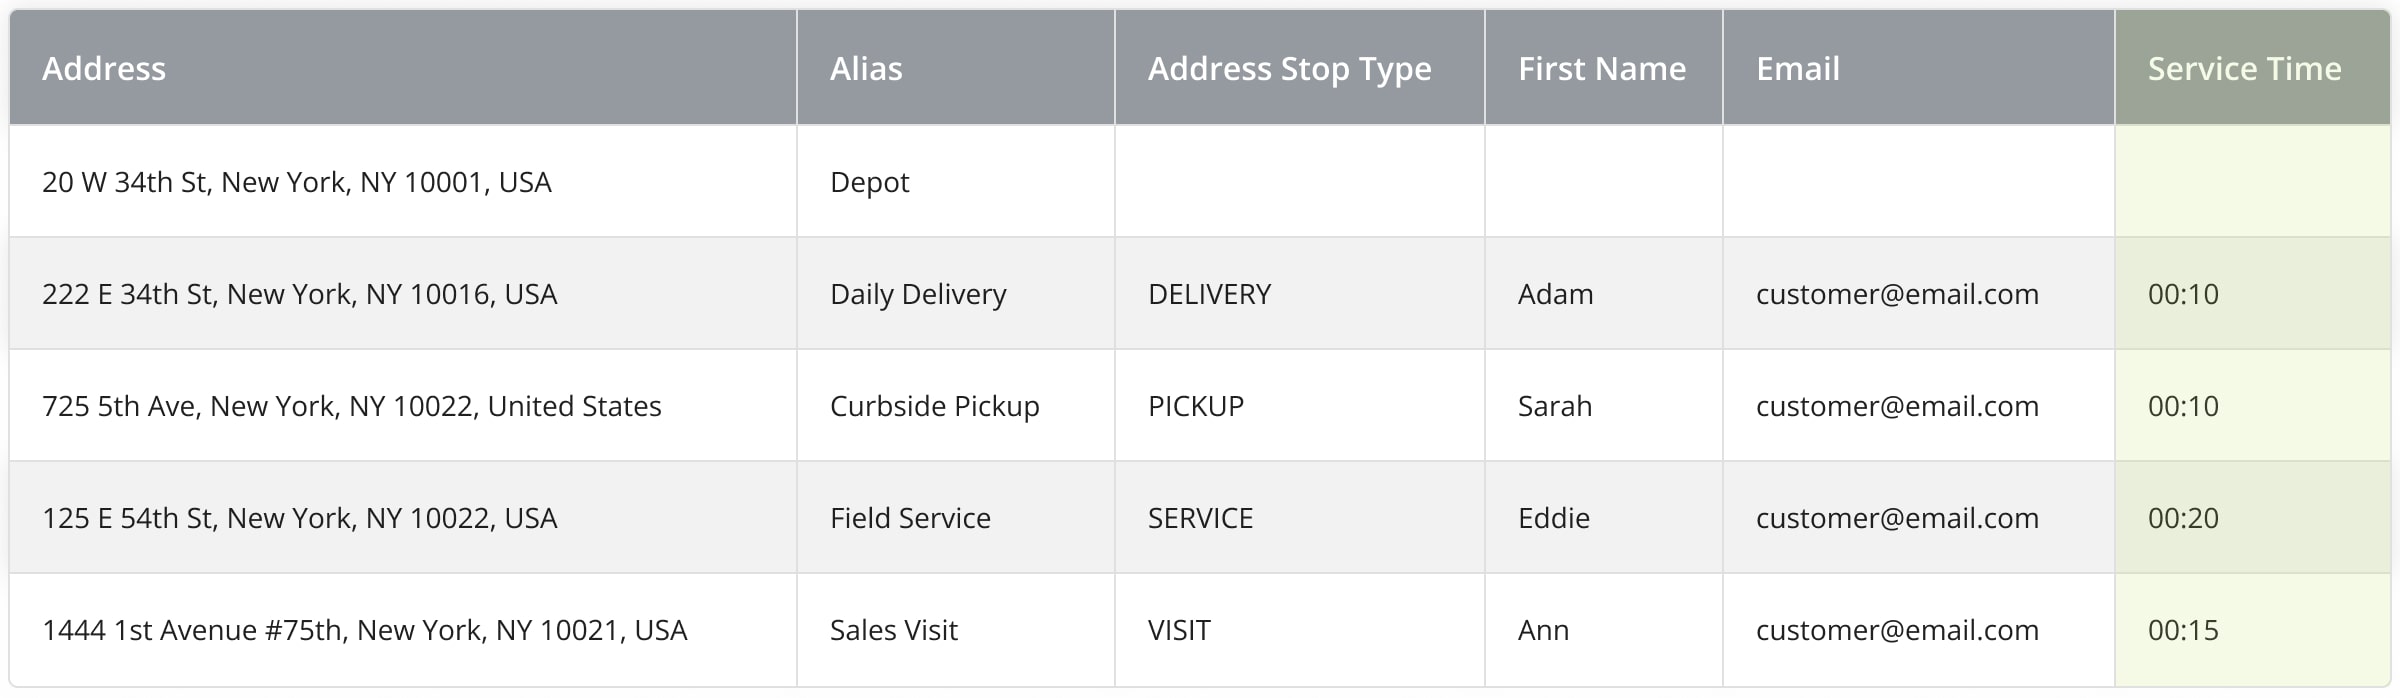 Add Service Time to route addresses in CSV to upload spreadsheet for route planning.